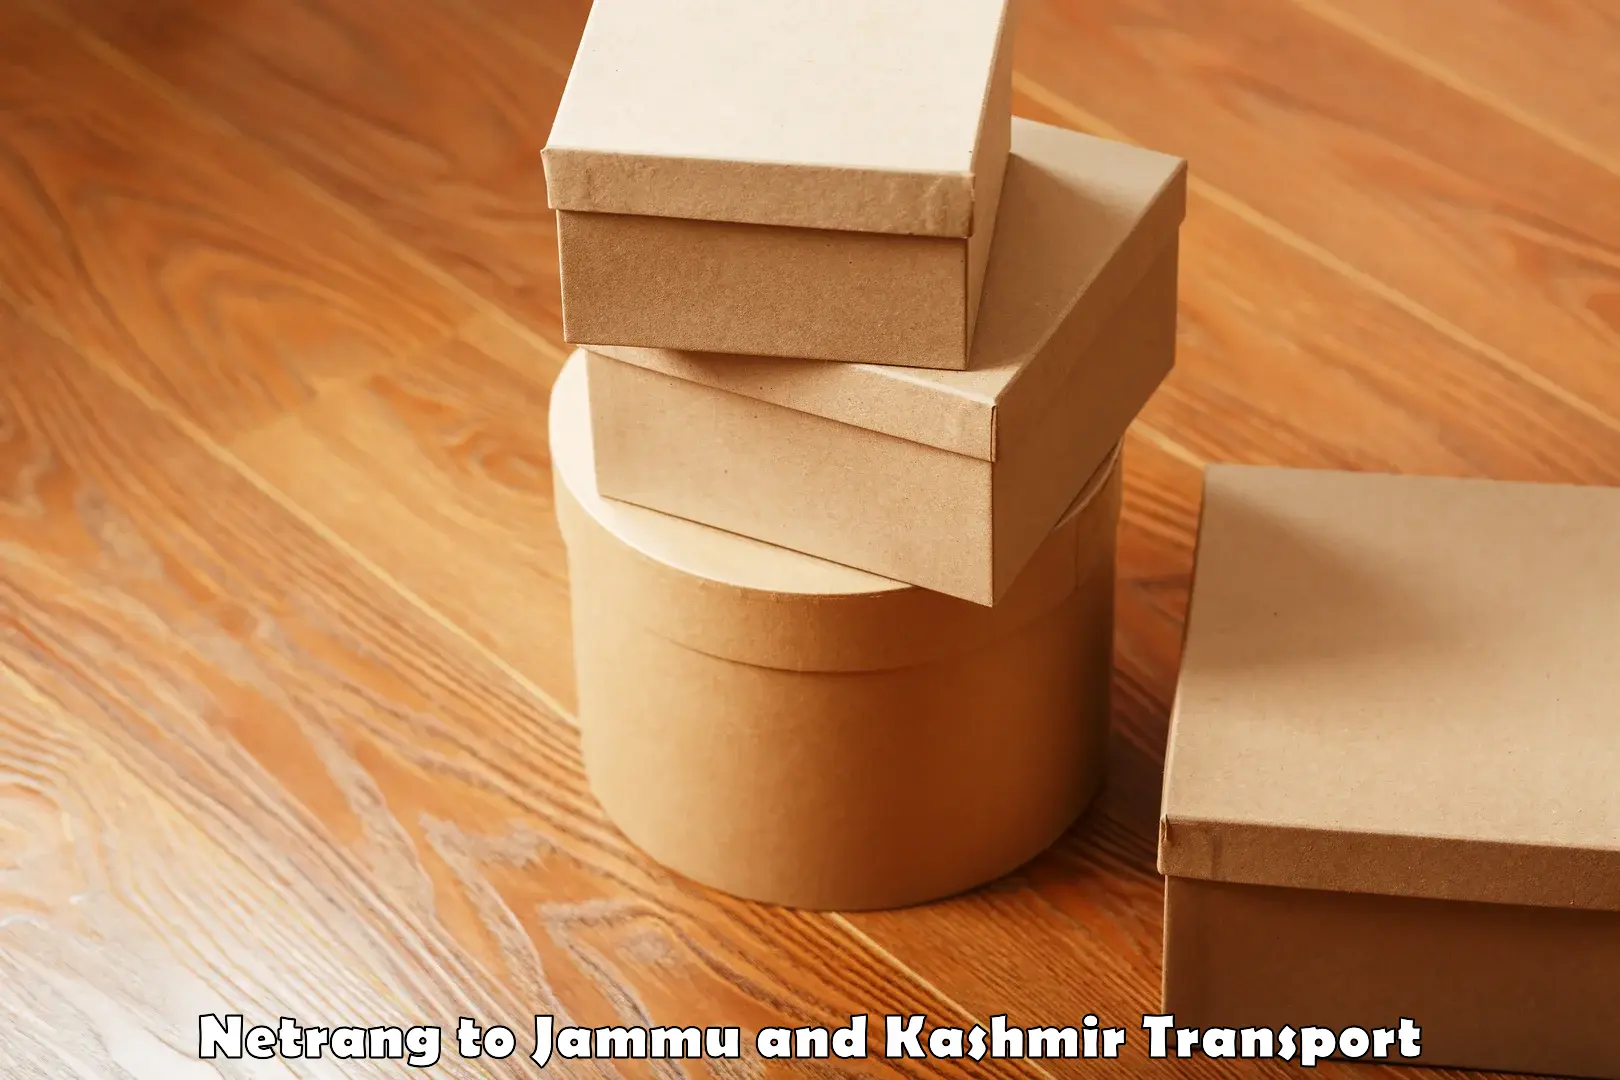 Package delivery services Netrang to University of Jammu